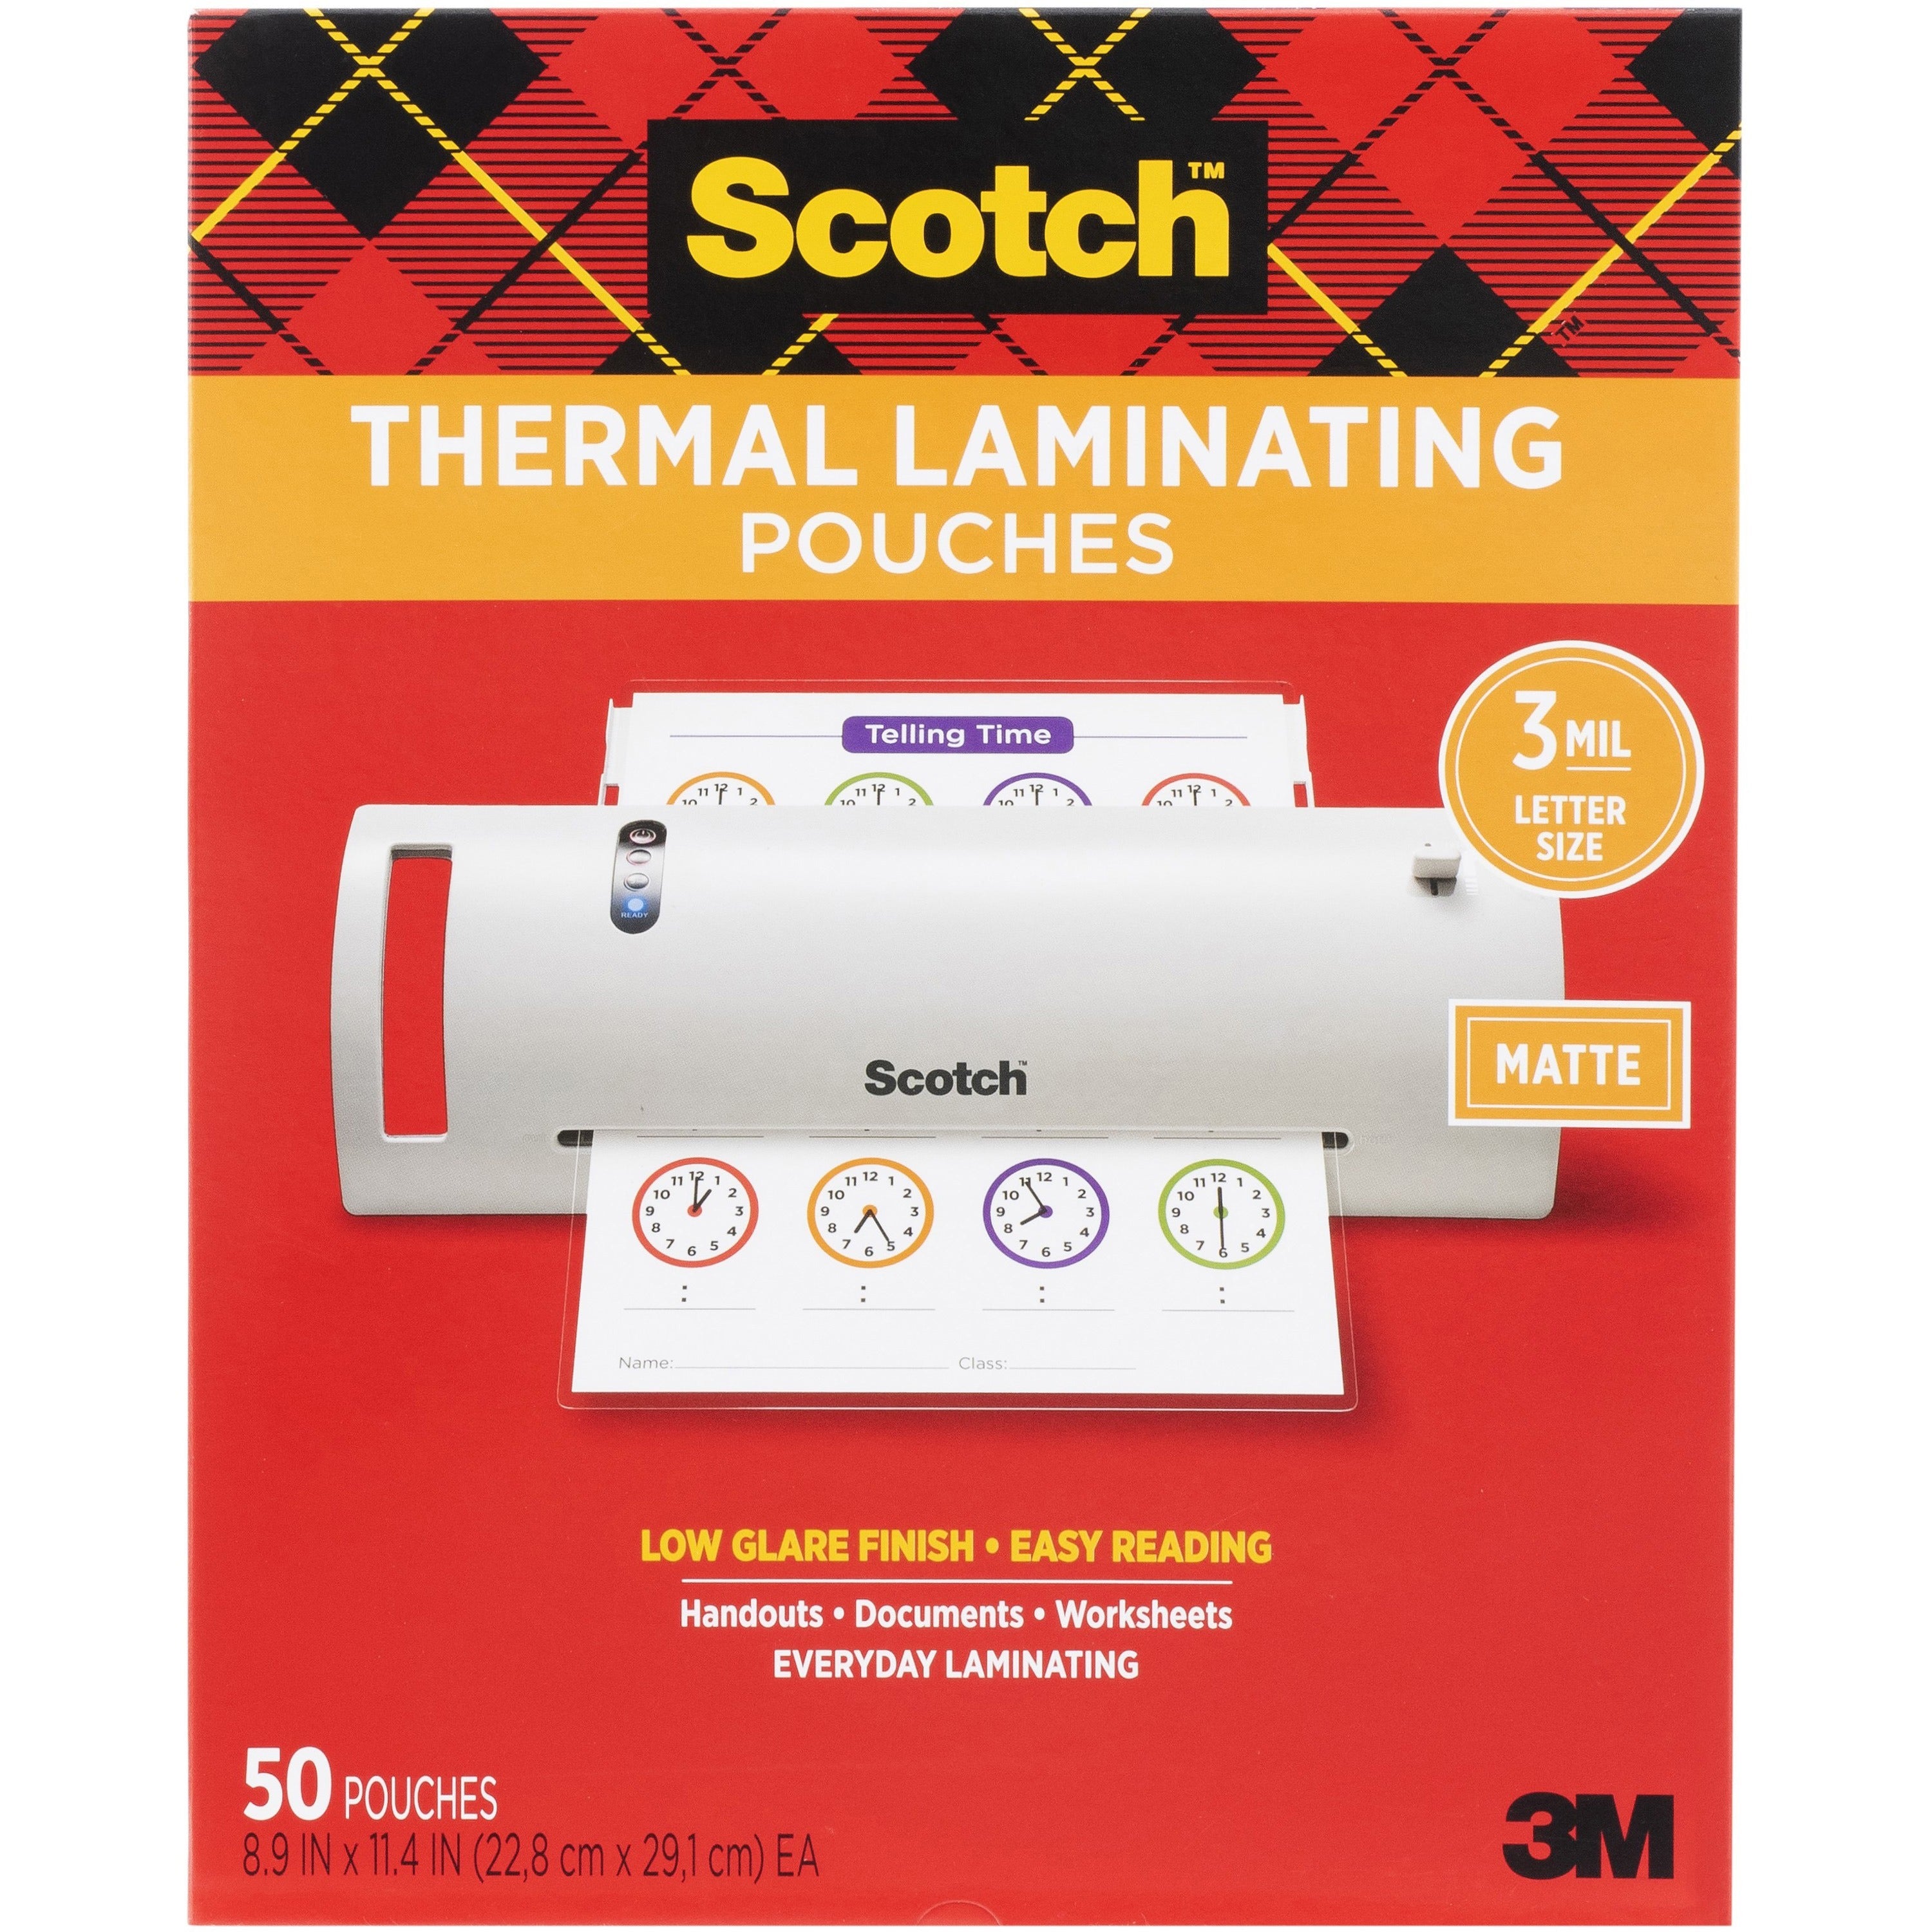 scotch-laminating-pouch-laminating-pouch-sheet-size-890-width-x-1140-length-x-3-mil-thickness-for-laminator-document-award-sign-calendar-certificate-artwork-schedule-double-sided-clear-1-pack_mmmtp385450m - 1